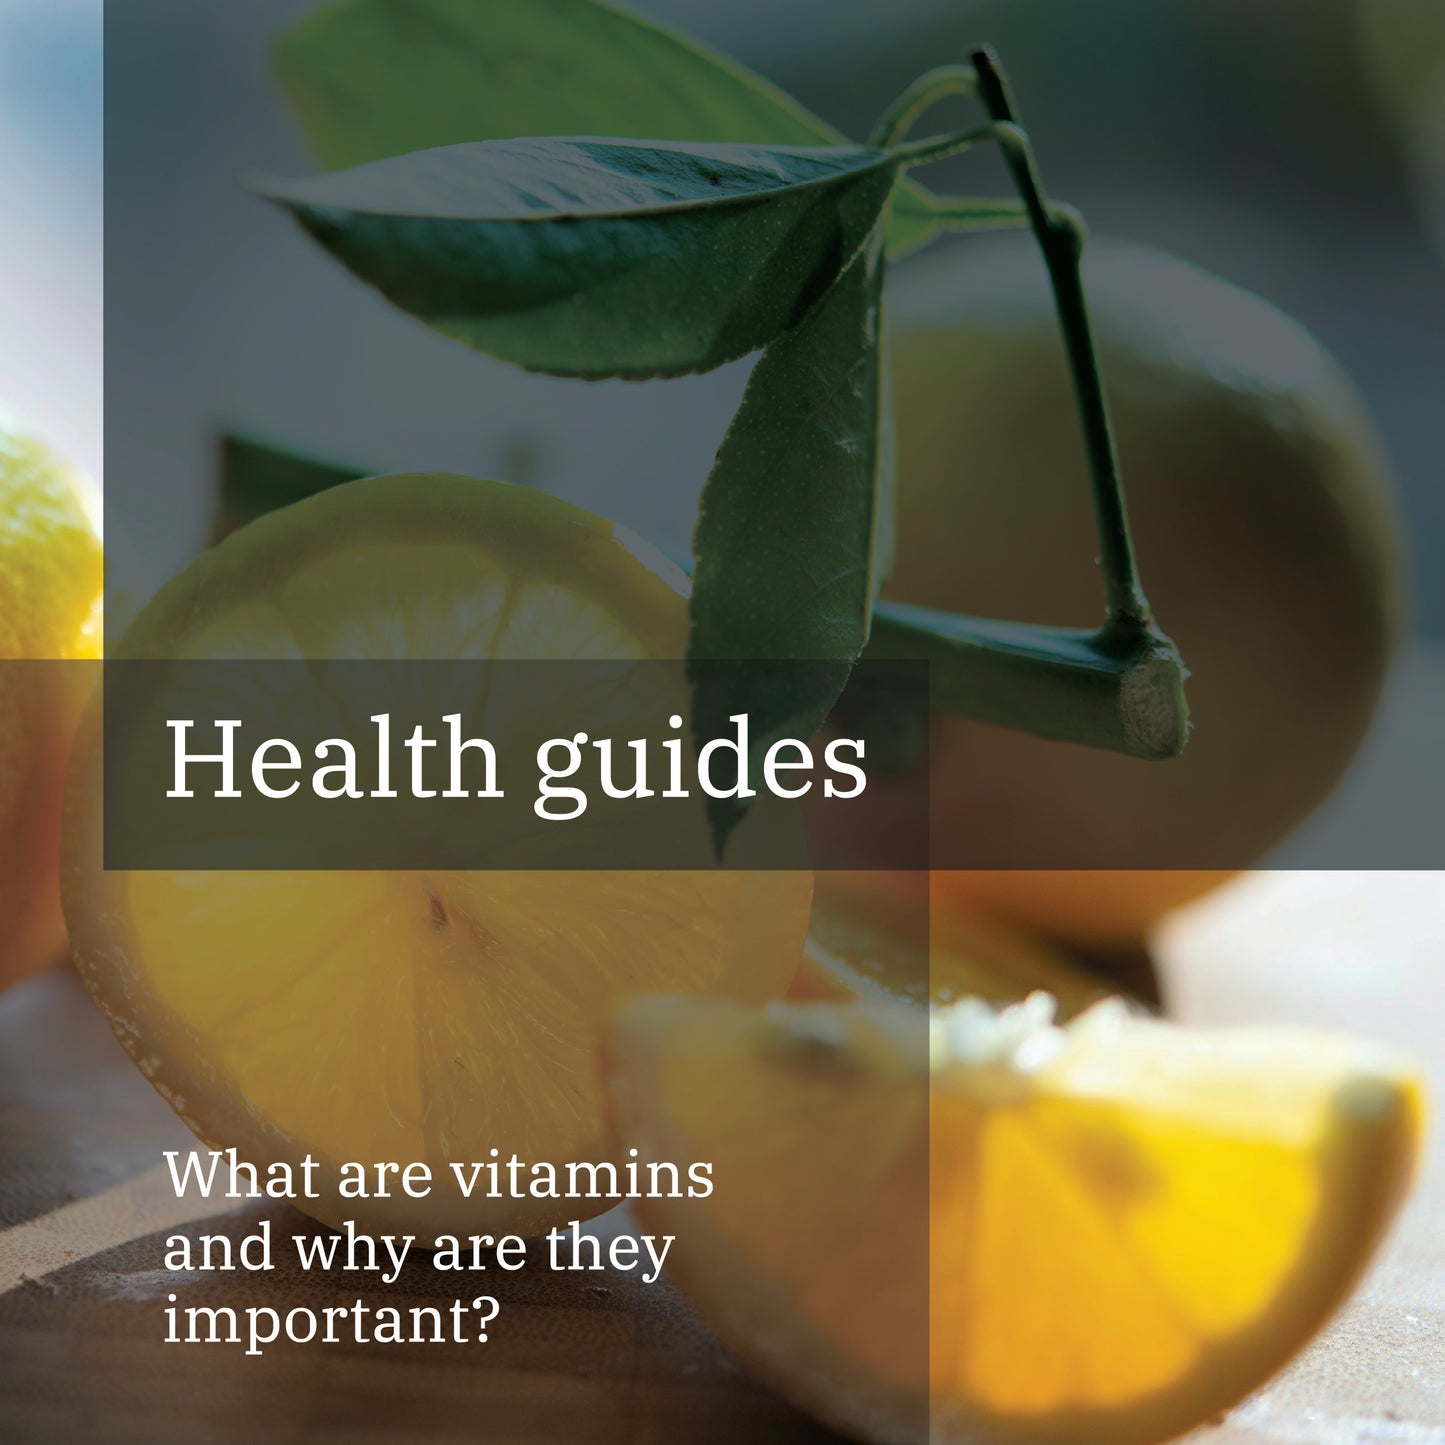 Why are vitamins important?